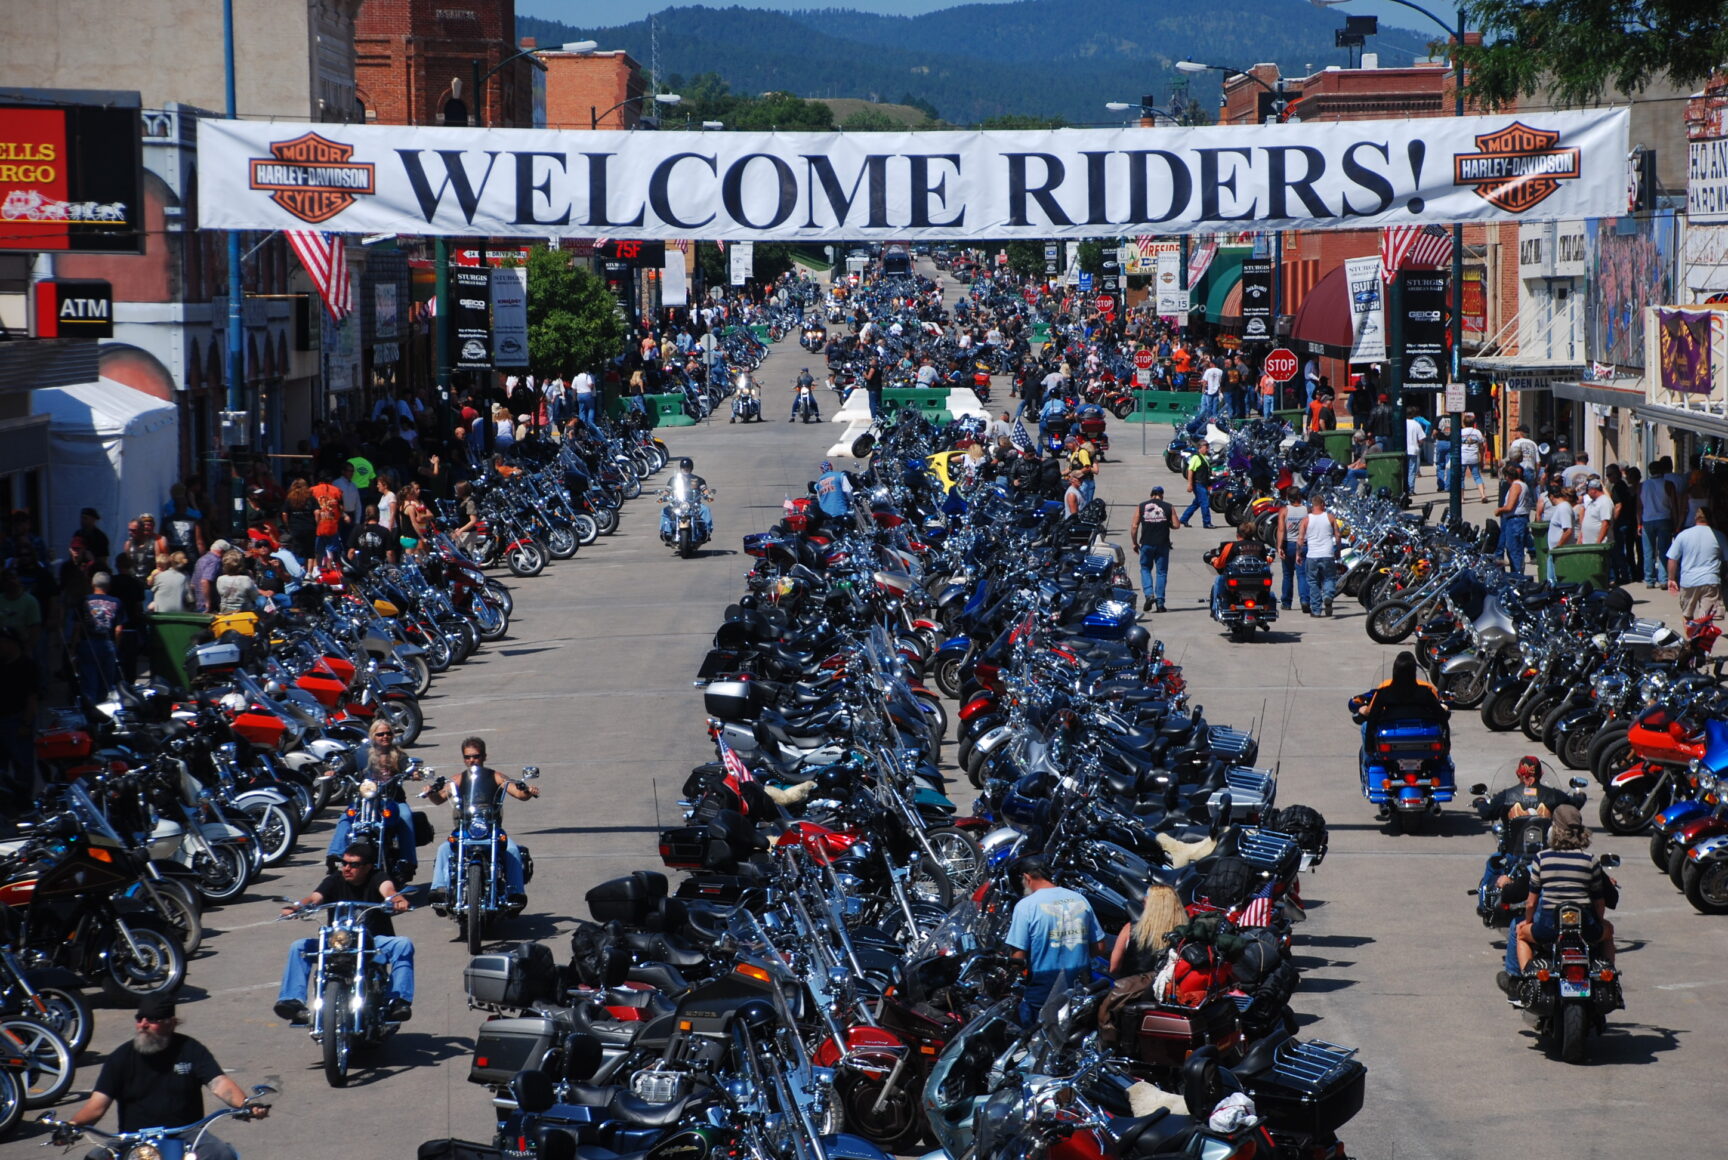 With an estimated attendance of 500,000 people, the Sturgis Motorcycle Rall...